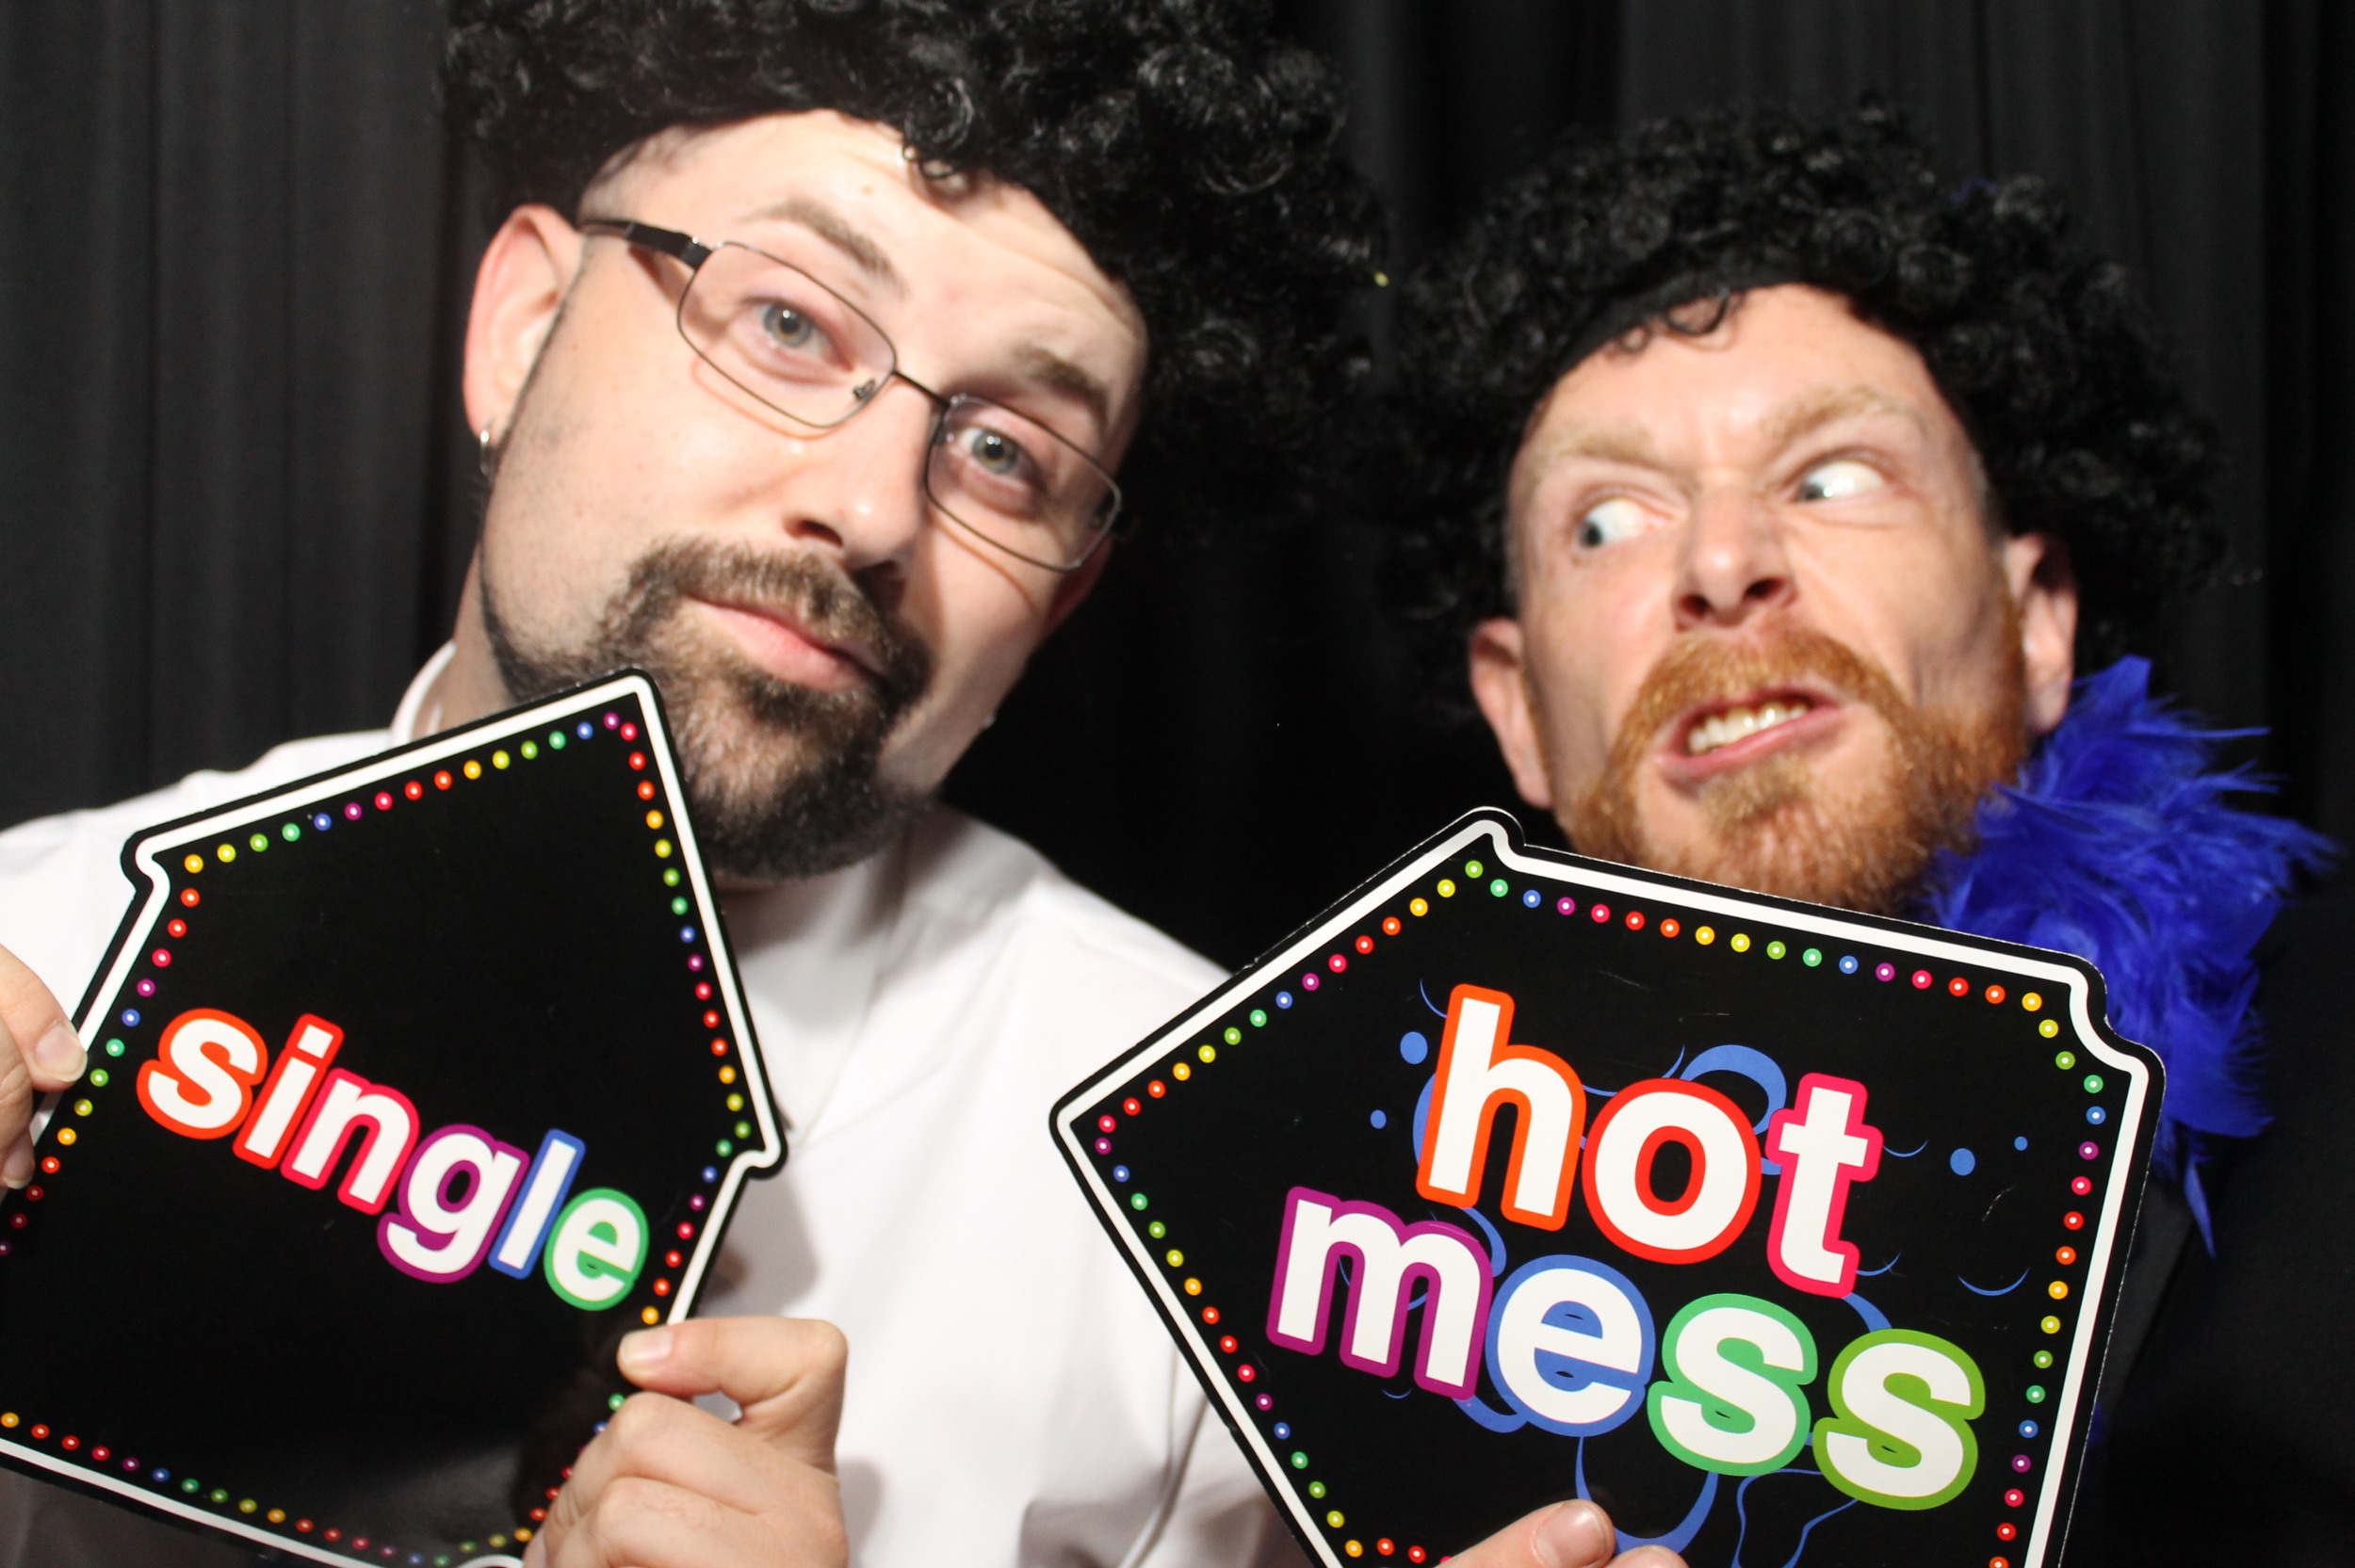 Snapshot Photobooths at the Avenue in Long Branch, New Jersey